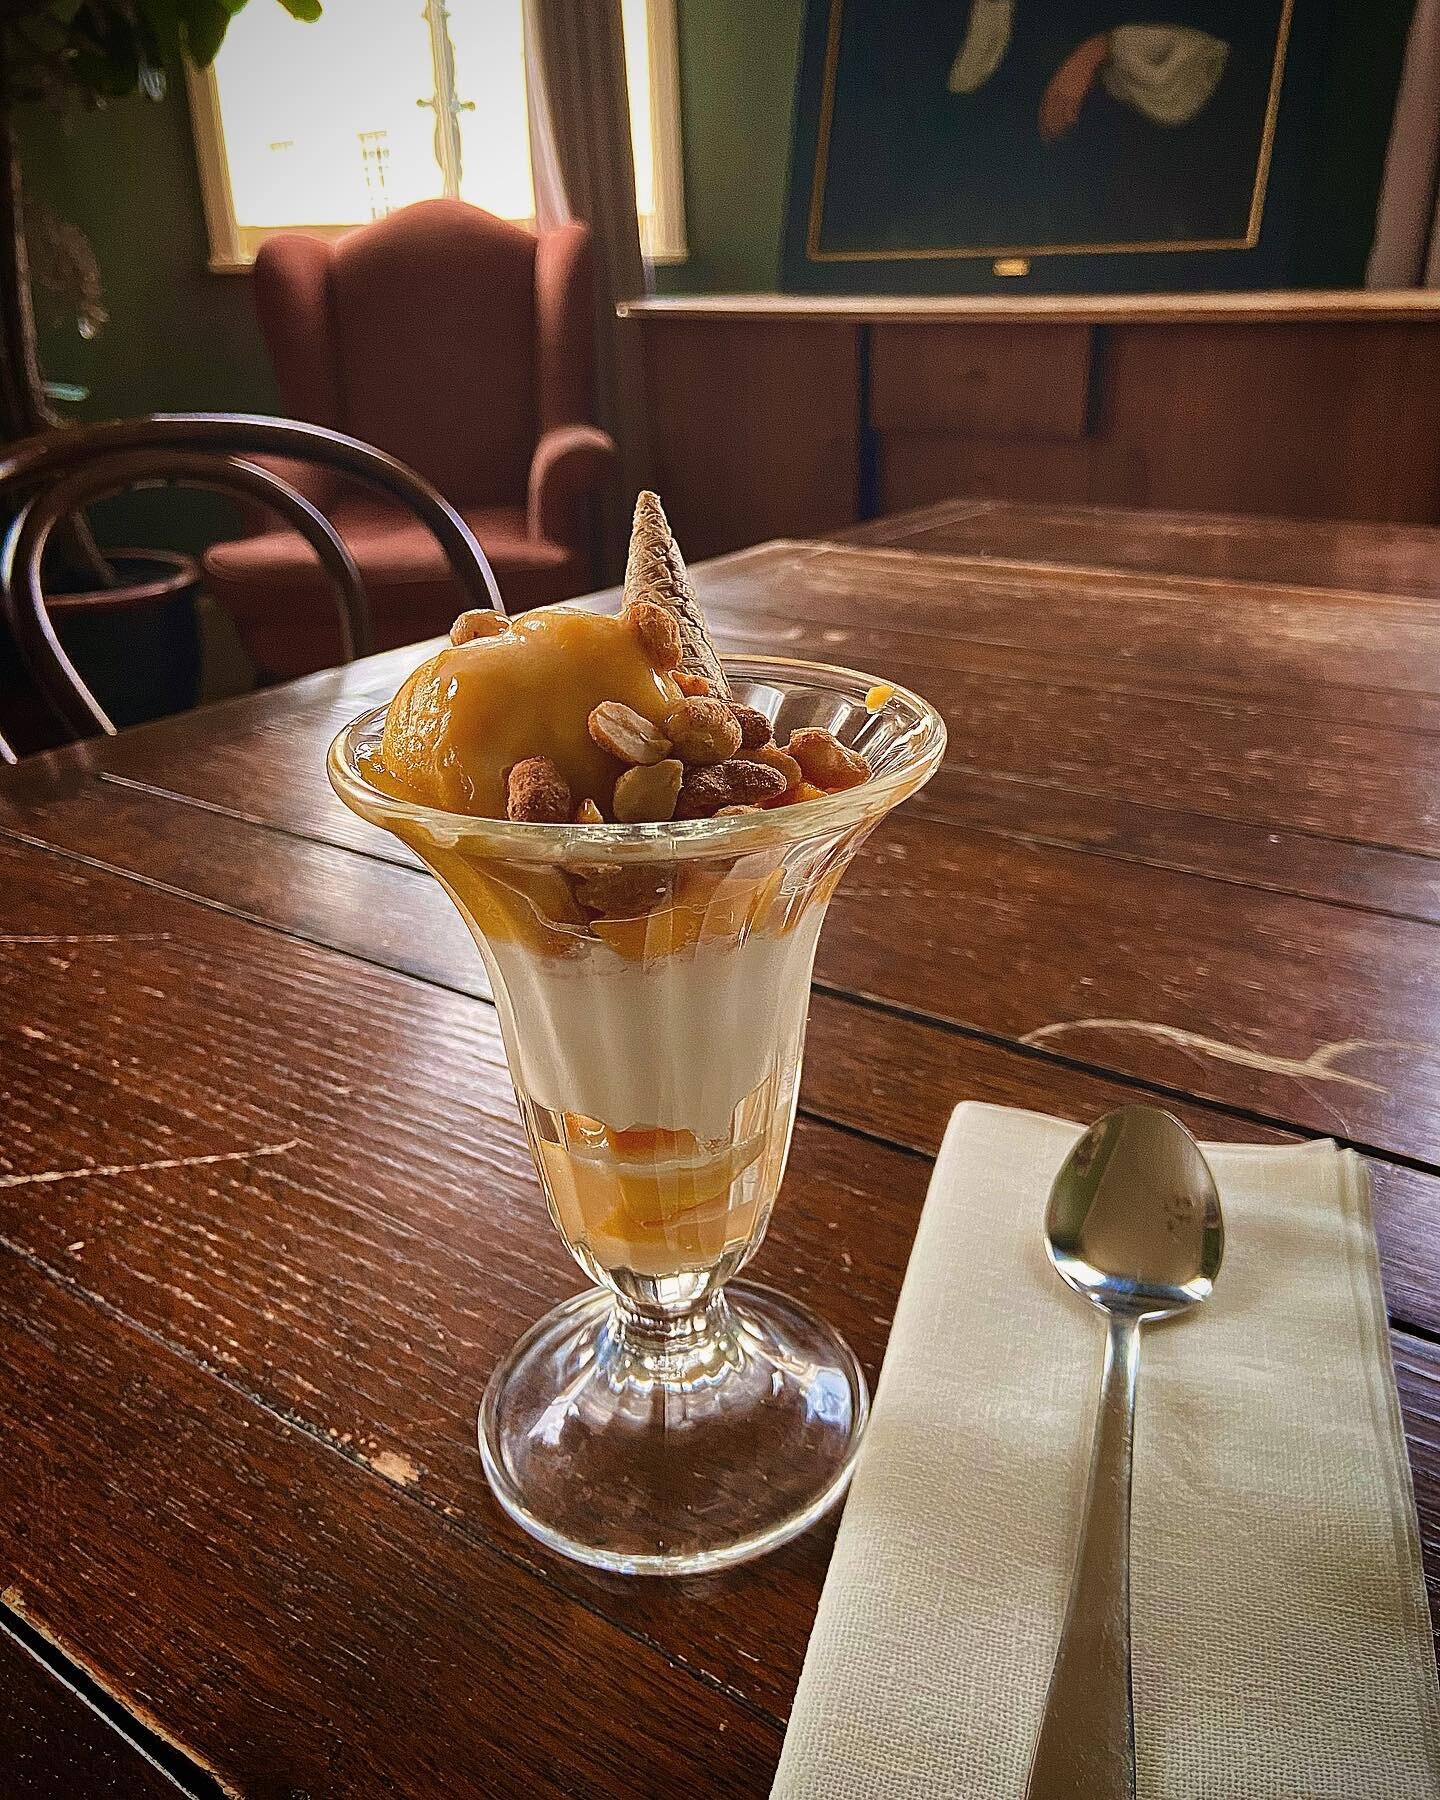 Fancy some dessert? Try our Mango Sundae. Fresh mango with vegan coconut ice cream, mango sorbet, cream of coconut and crushed peanuts. The feeling of summer. 
.
.
.
.#summer#icecream#tropical#dessert#summervibes#nottinghill#sweet#coconut